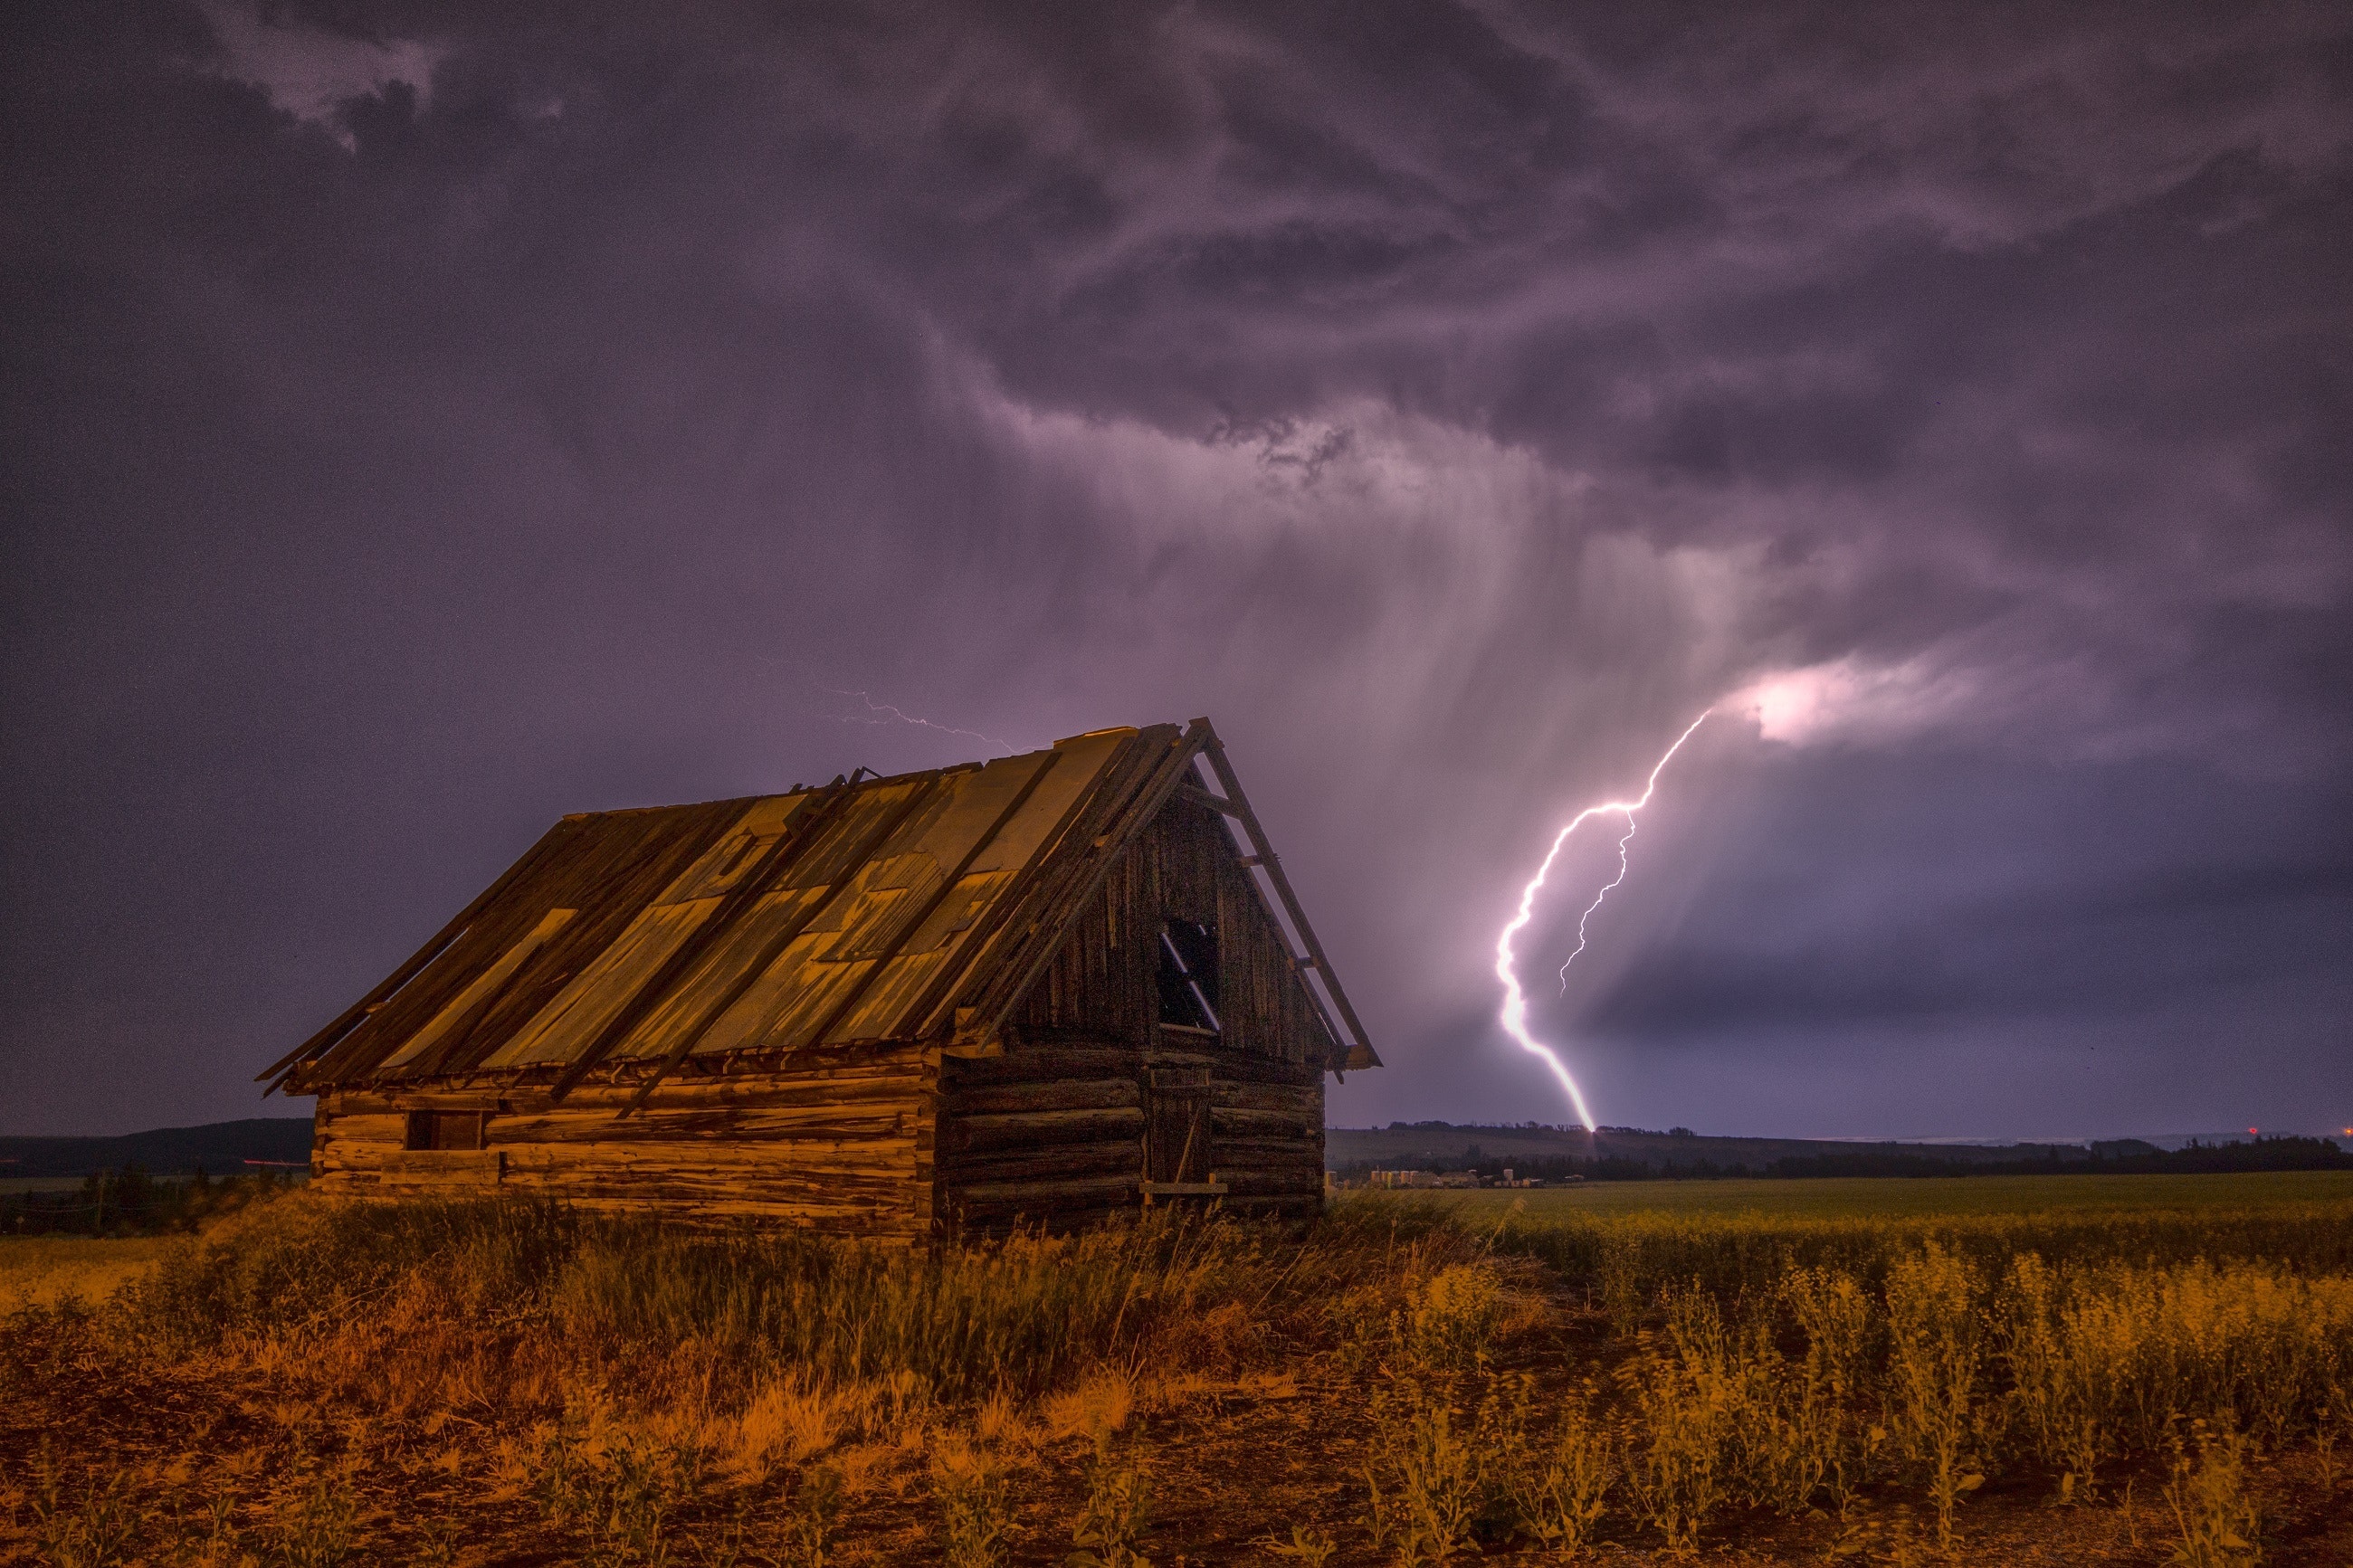 Brown and beige wooden barn surrounded with brown grasses under thunderclouds photo